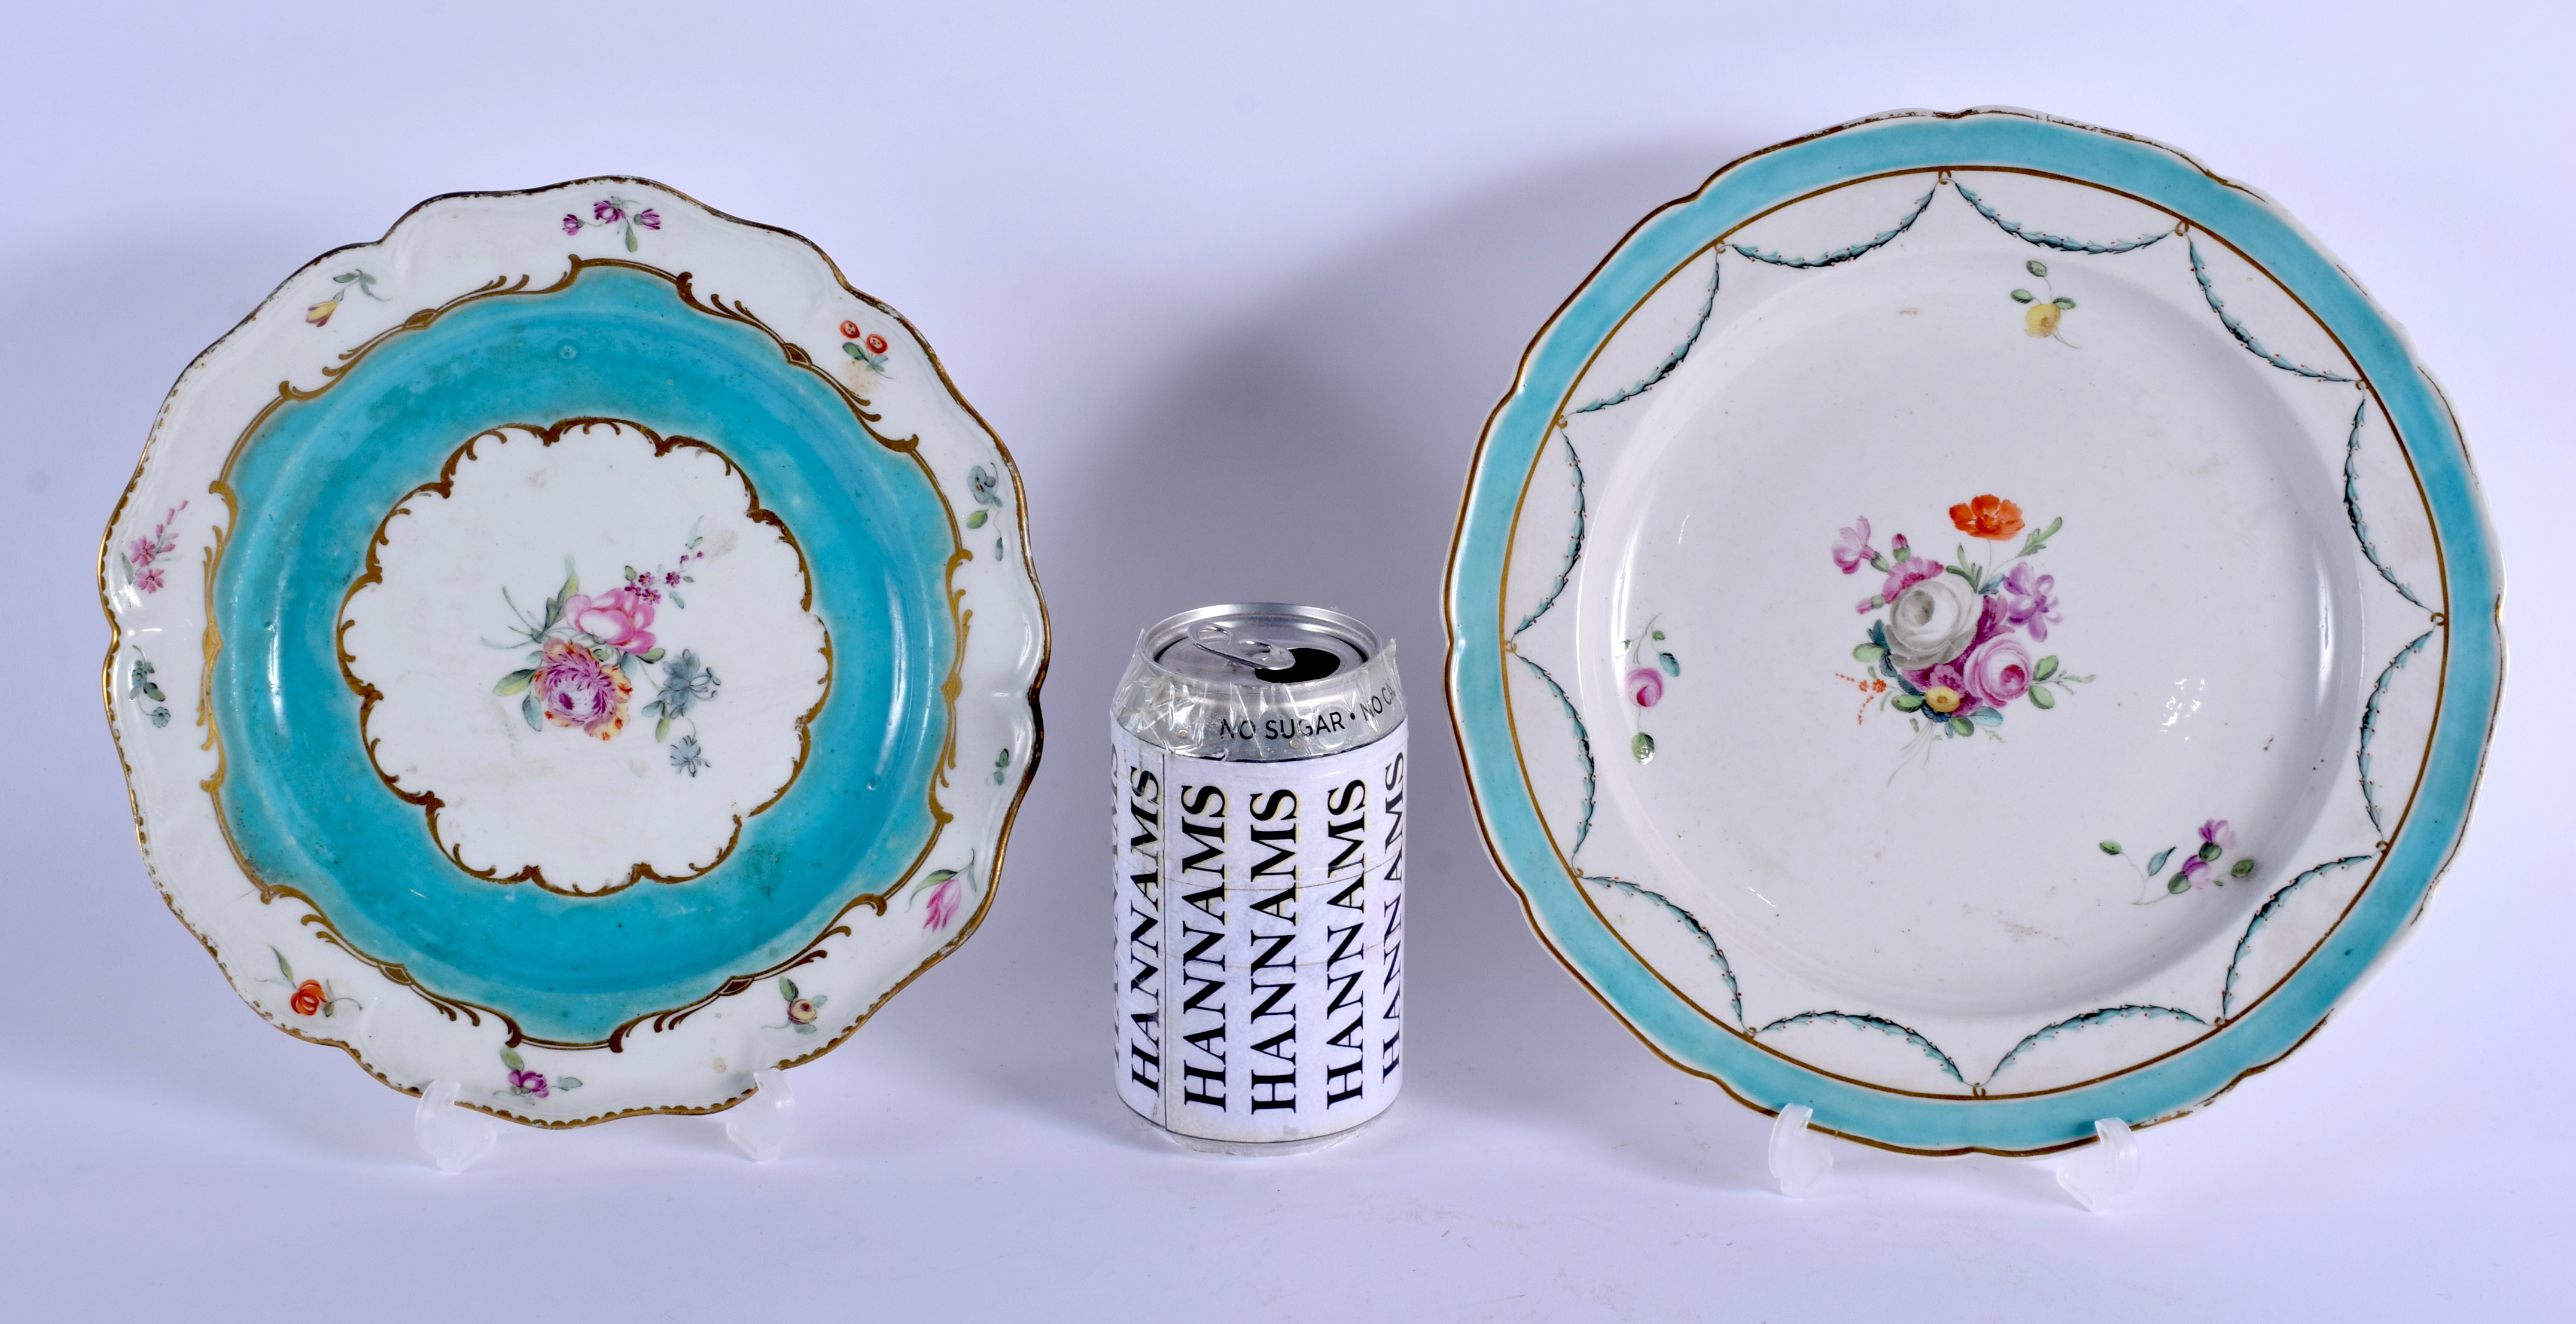 TWO 18TH CENTURY CHELSEA DERBY PORCELAIN PLATES painted upon a turquoise blue border. Largest 22 cm